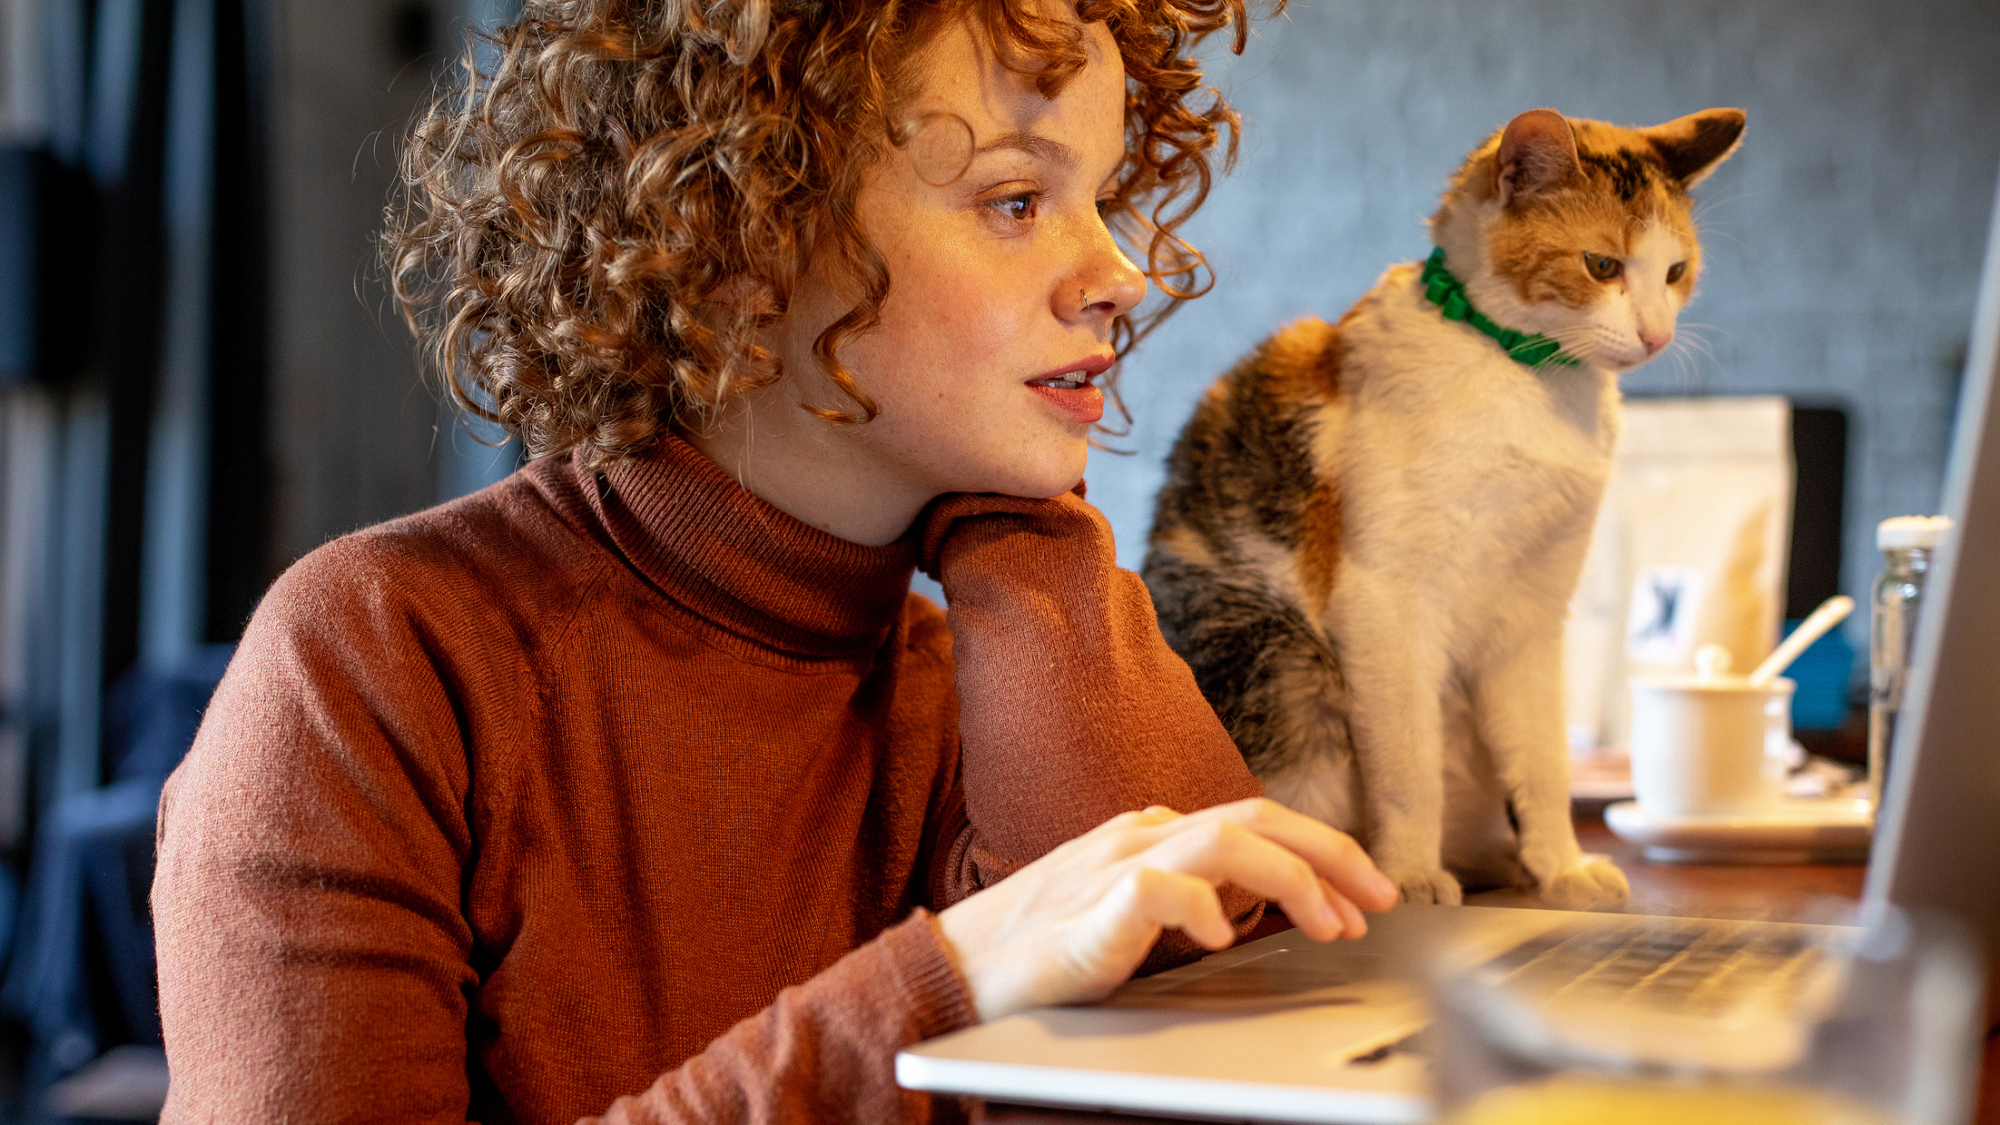 Woman working on computer with cat by her side.